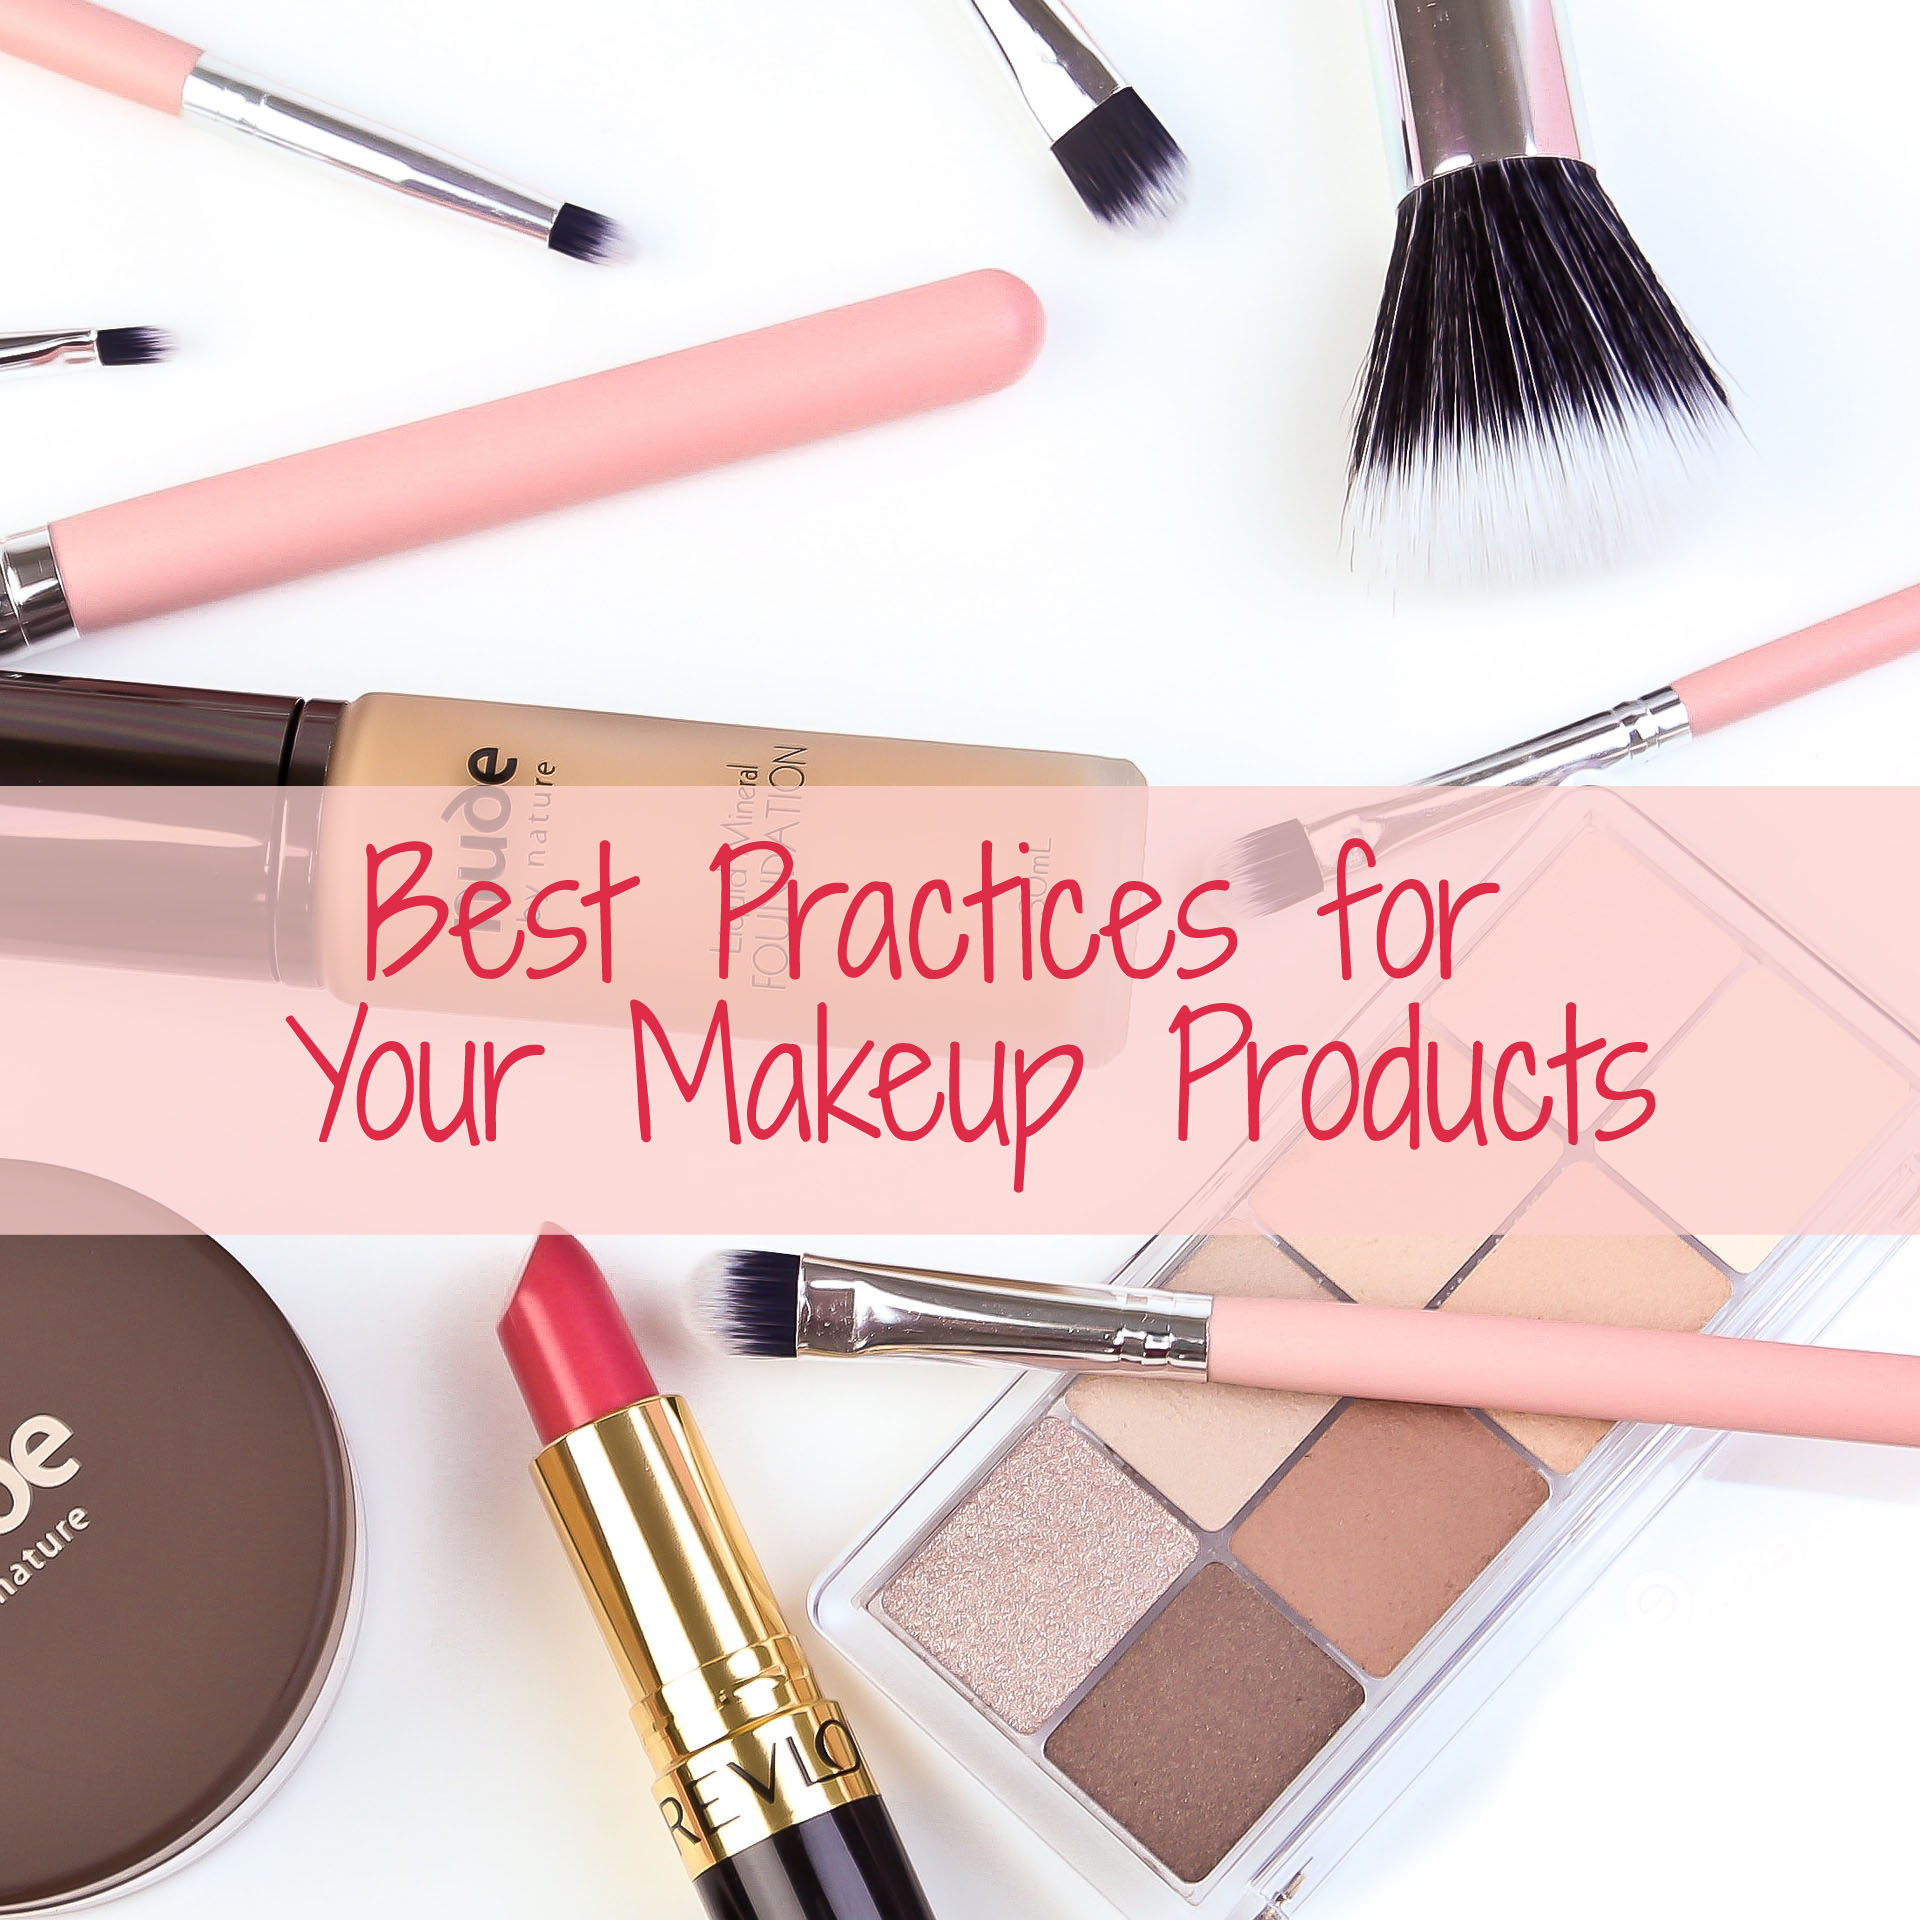 Best Practices for Your Makeup Products